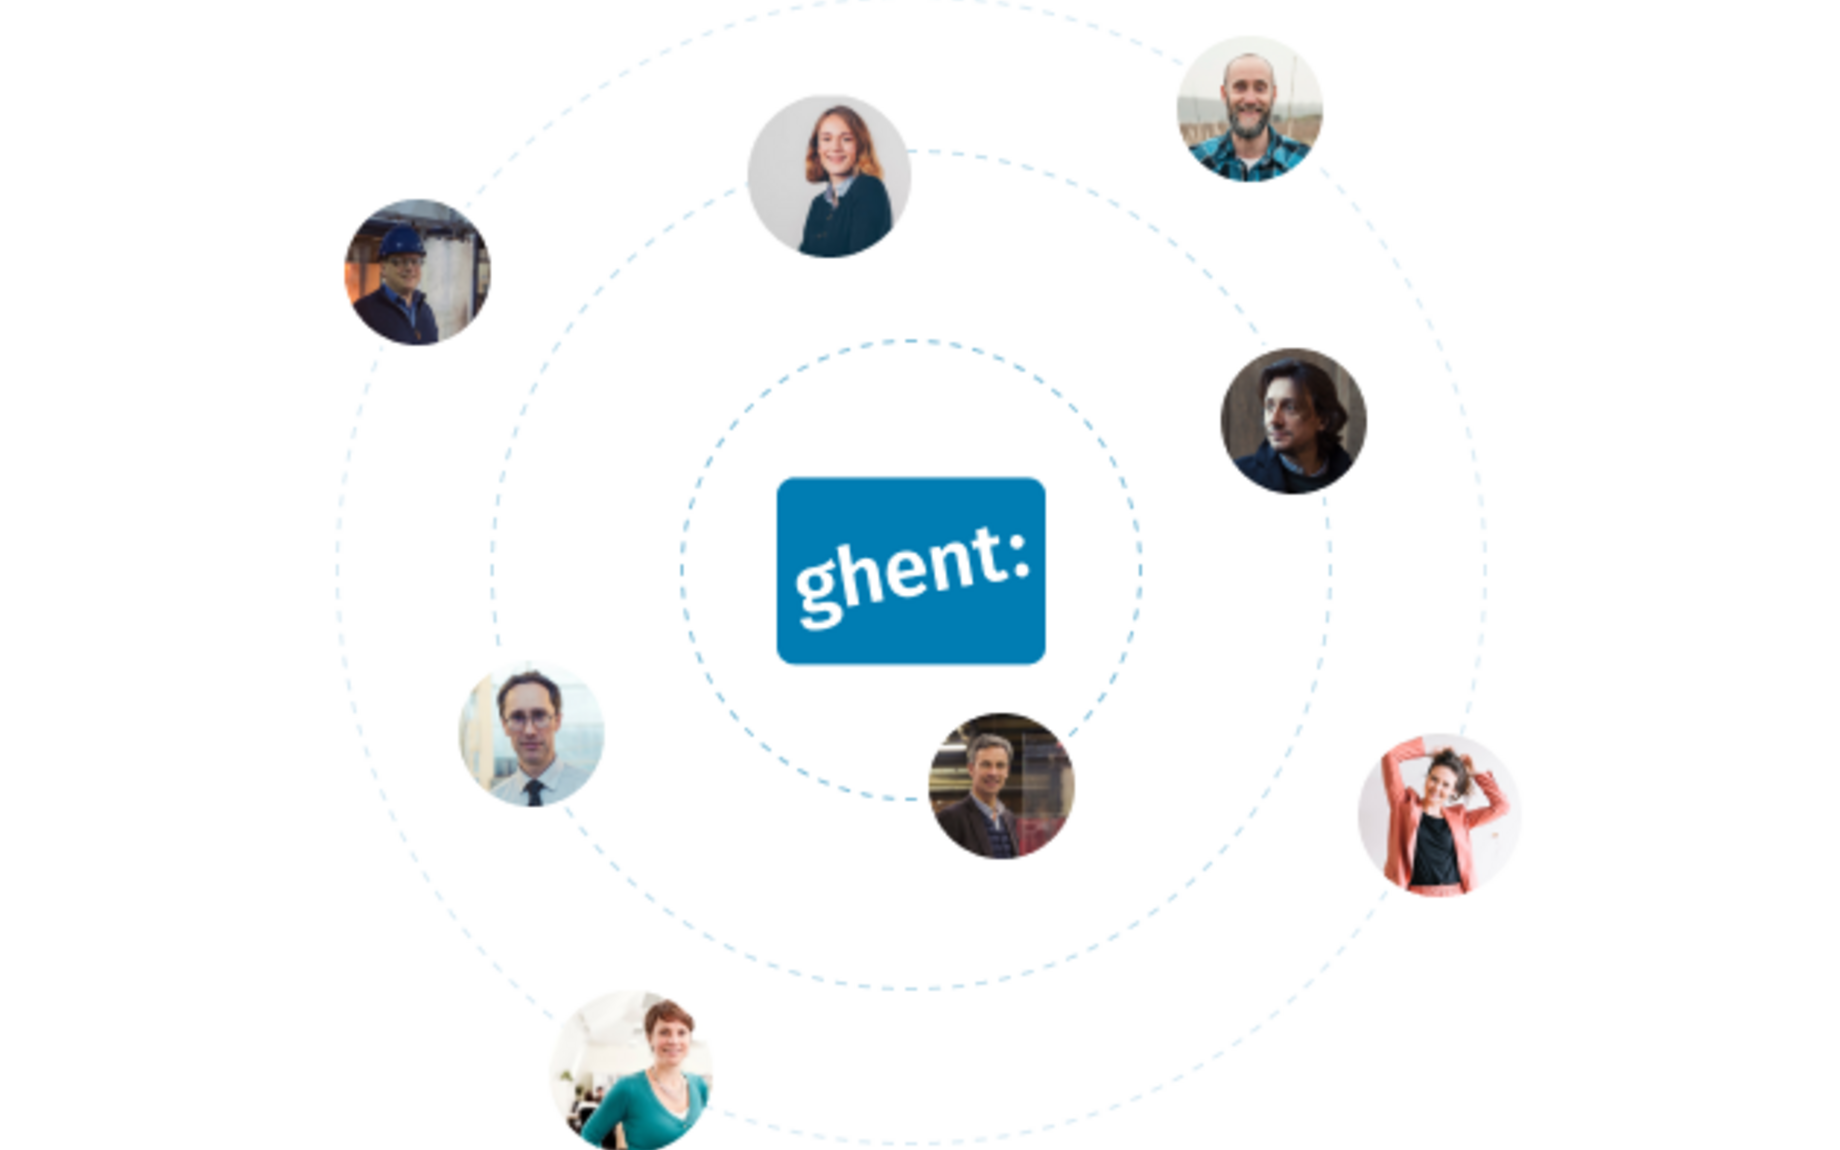 Invest in Ghent - we are connected